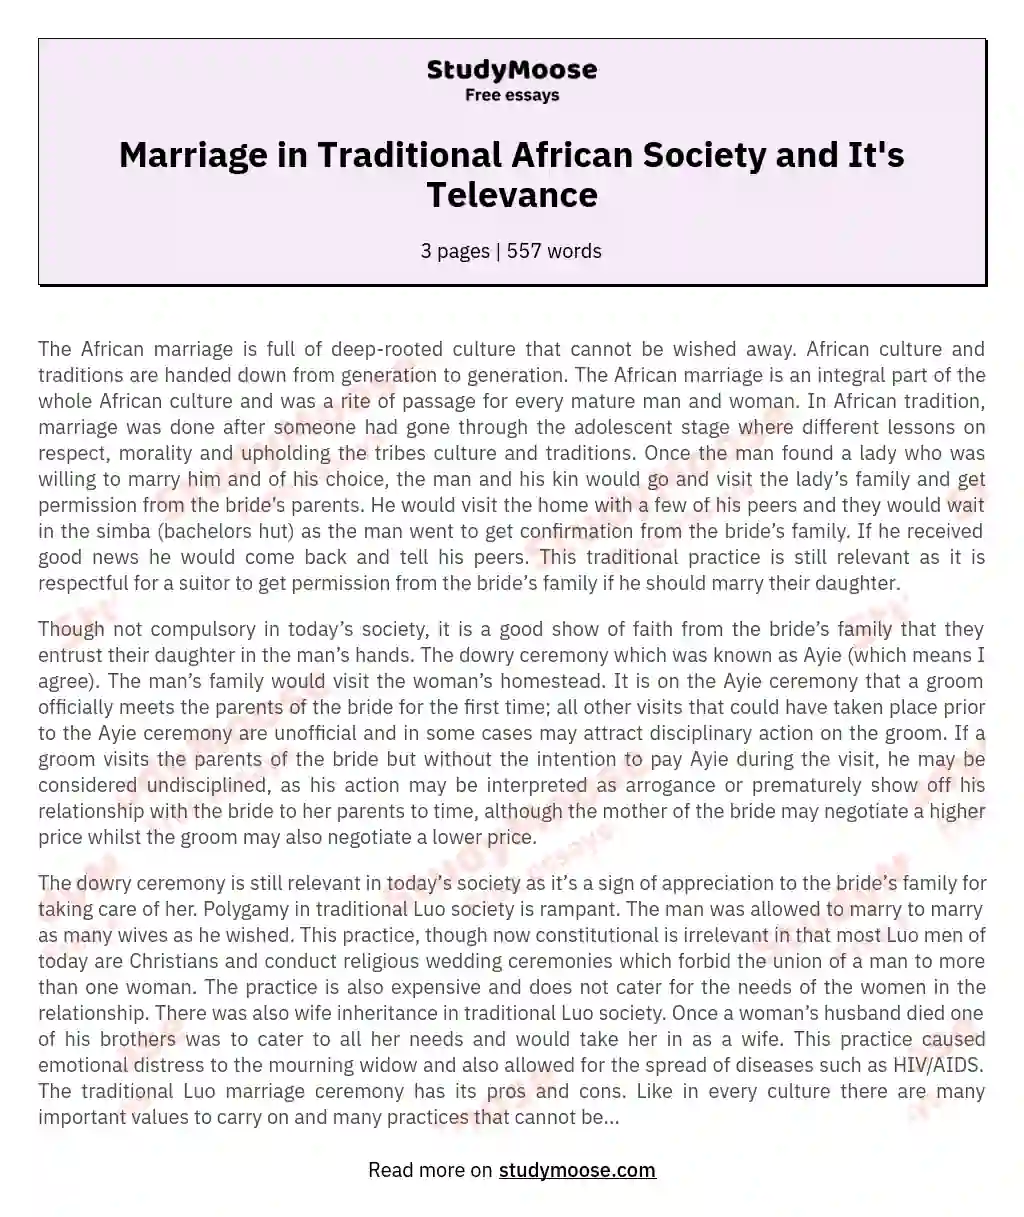 Marriage in Traditional African Society and It's Televance essay